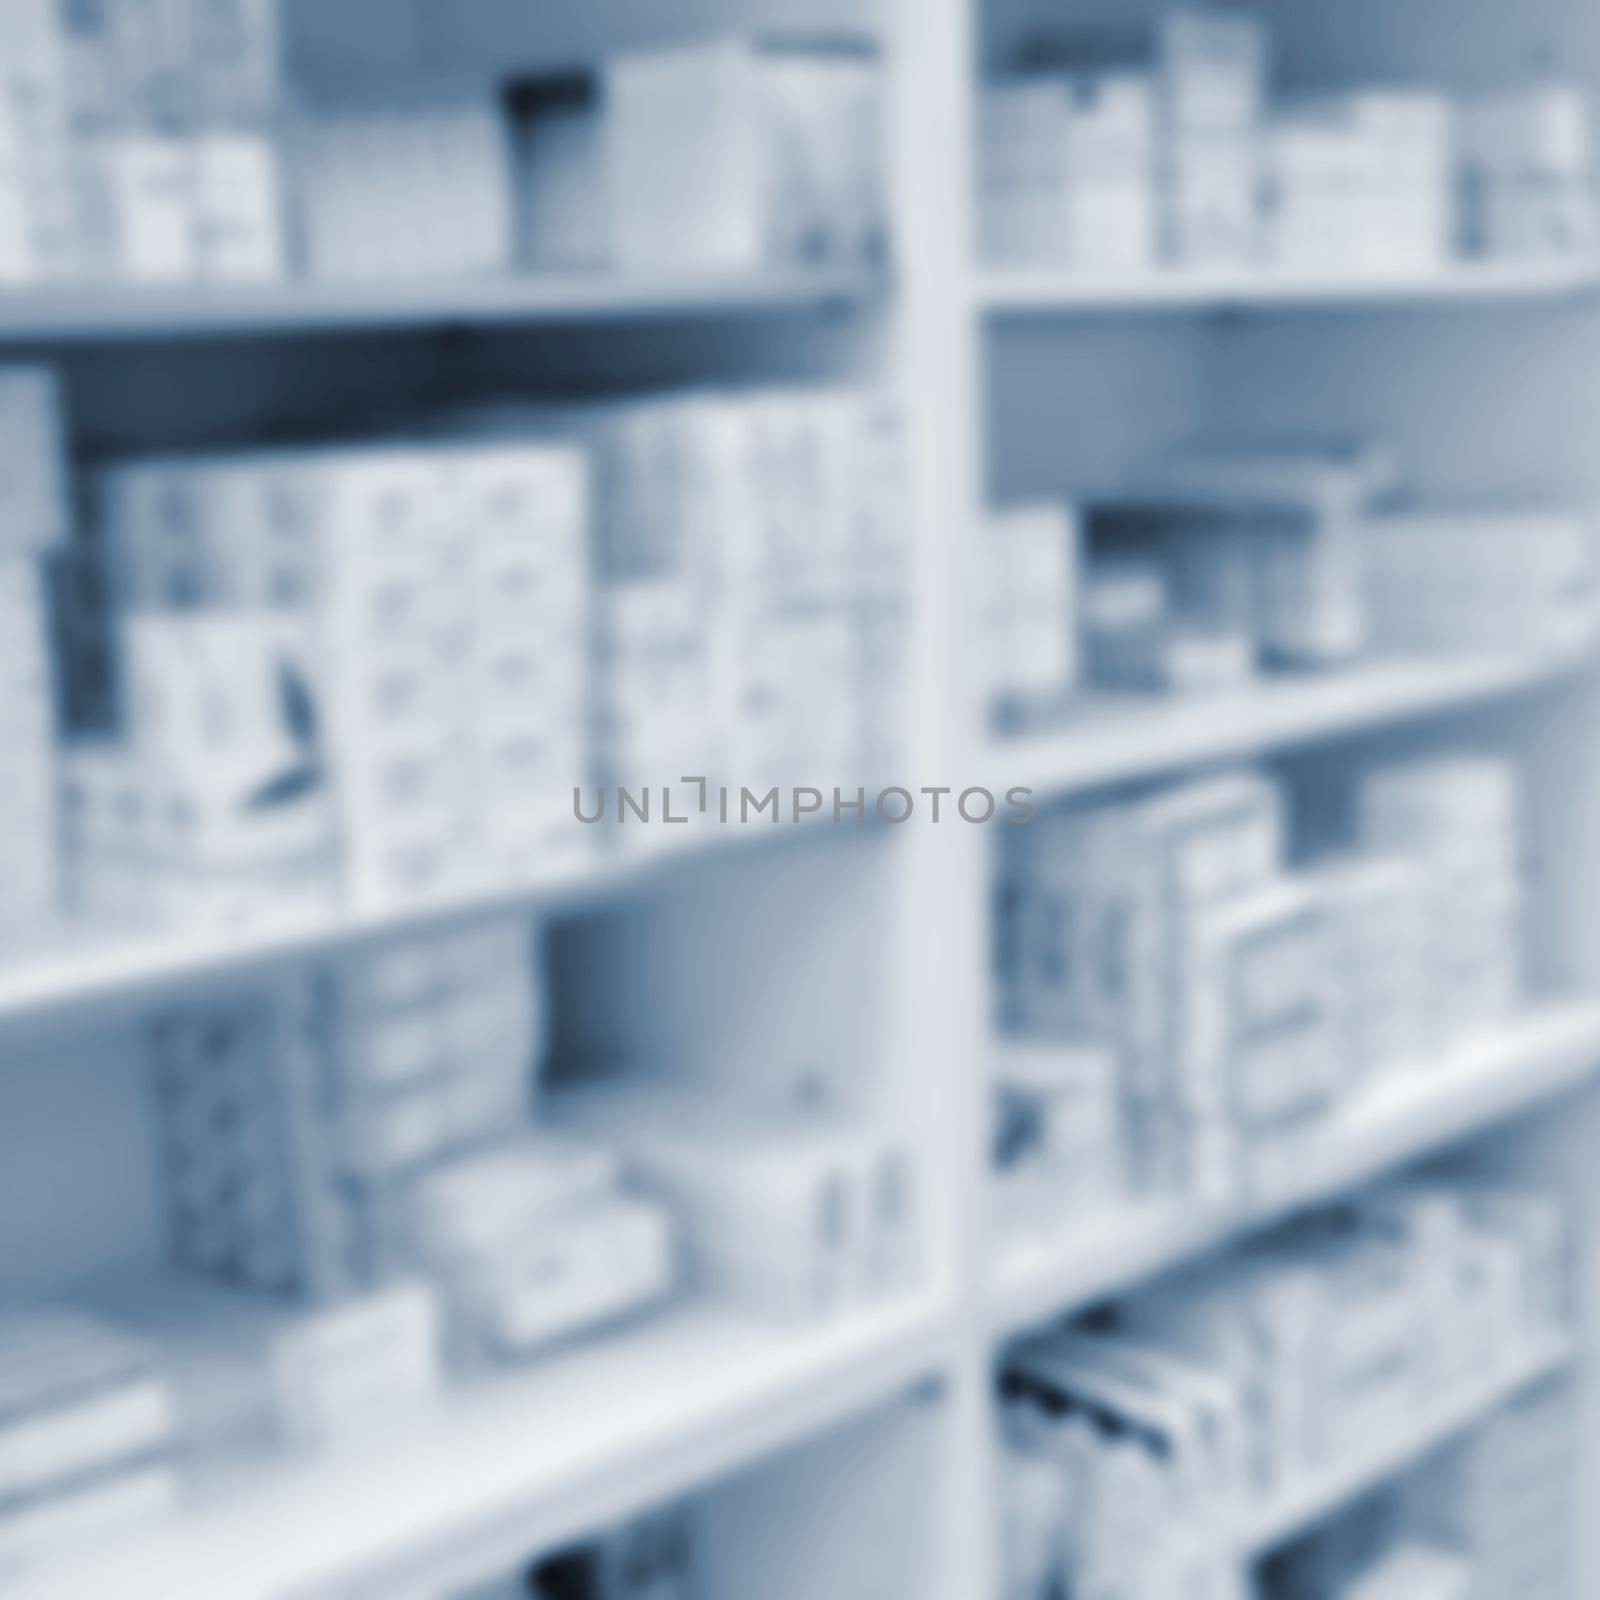 Pharmacy store drugs shelves interior blurred background by Montypeter